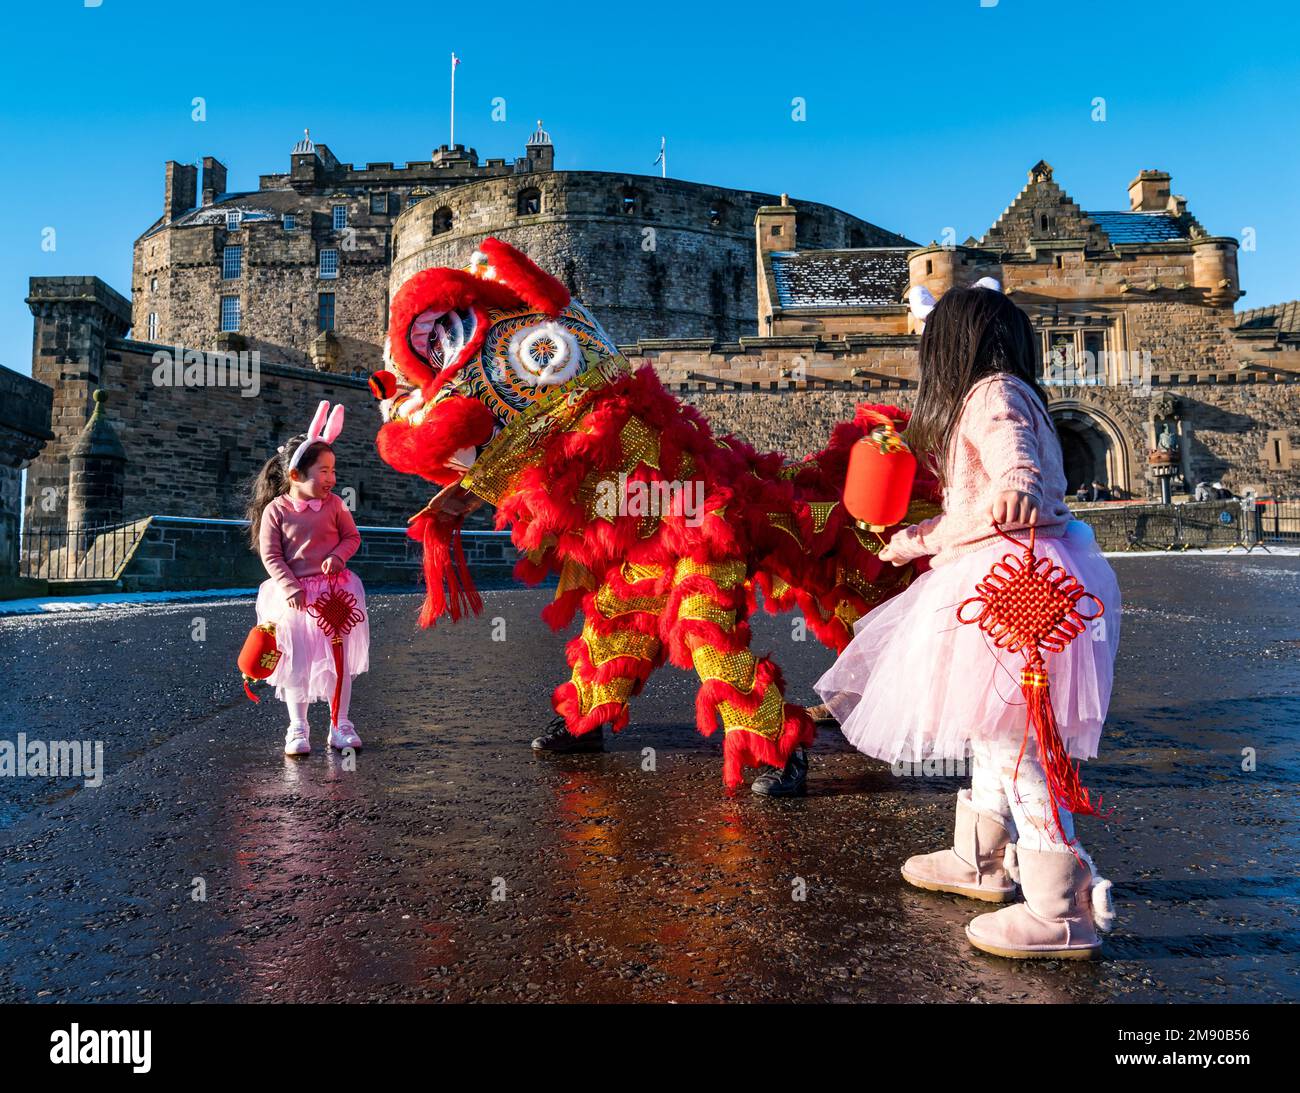 Edinburgh, Scotland, United Kingdom, 16th January 2023. Launch of Chinese New Year celebrations: children Luna Chen and Annabelle Ye (both 5 years old) and dragon dancers on the castle esplanade launch the capital city’s Chinese New Year festivities. Credit: Sally Anderson/Alamy Live News Stock Photo